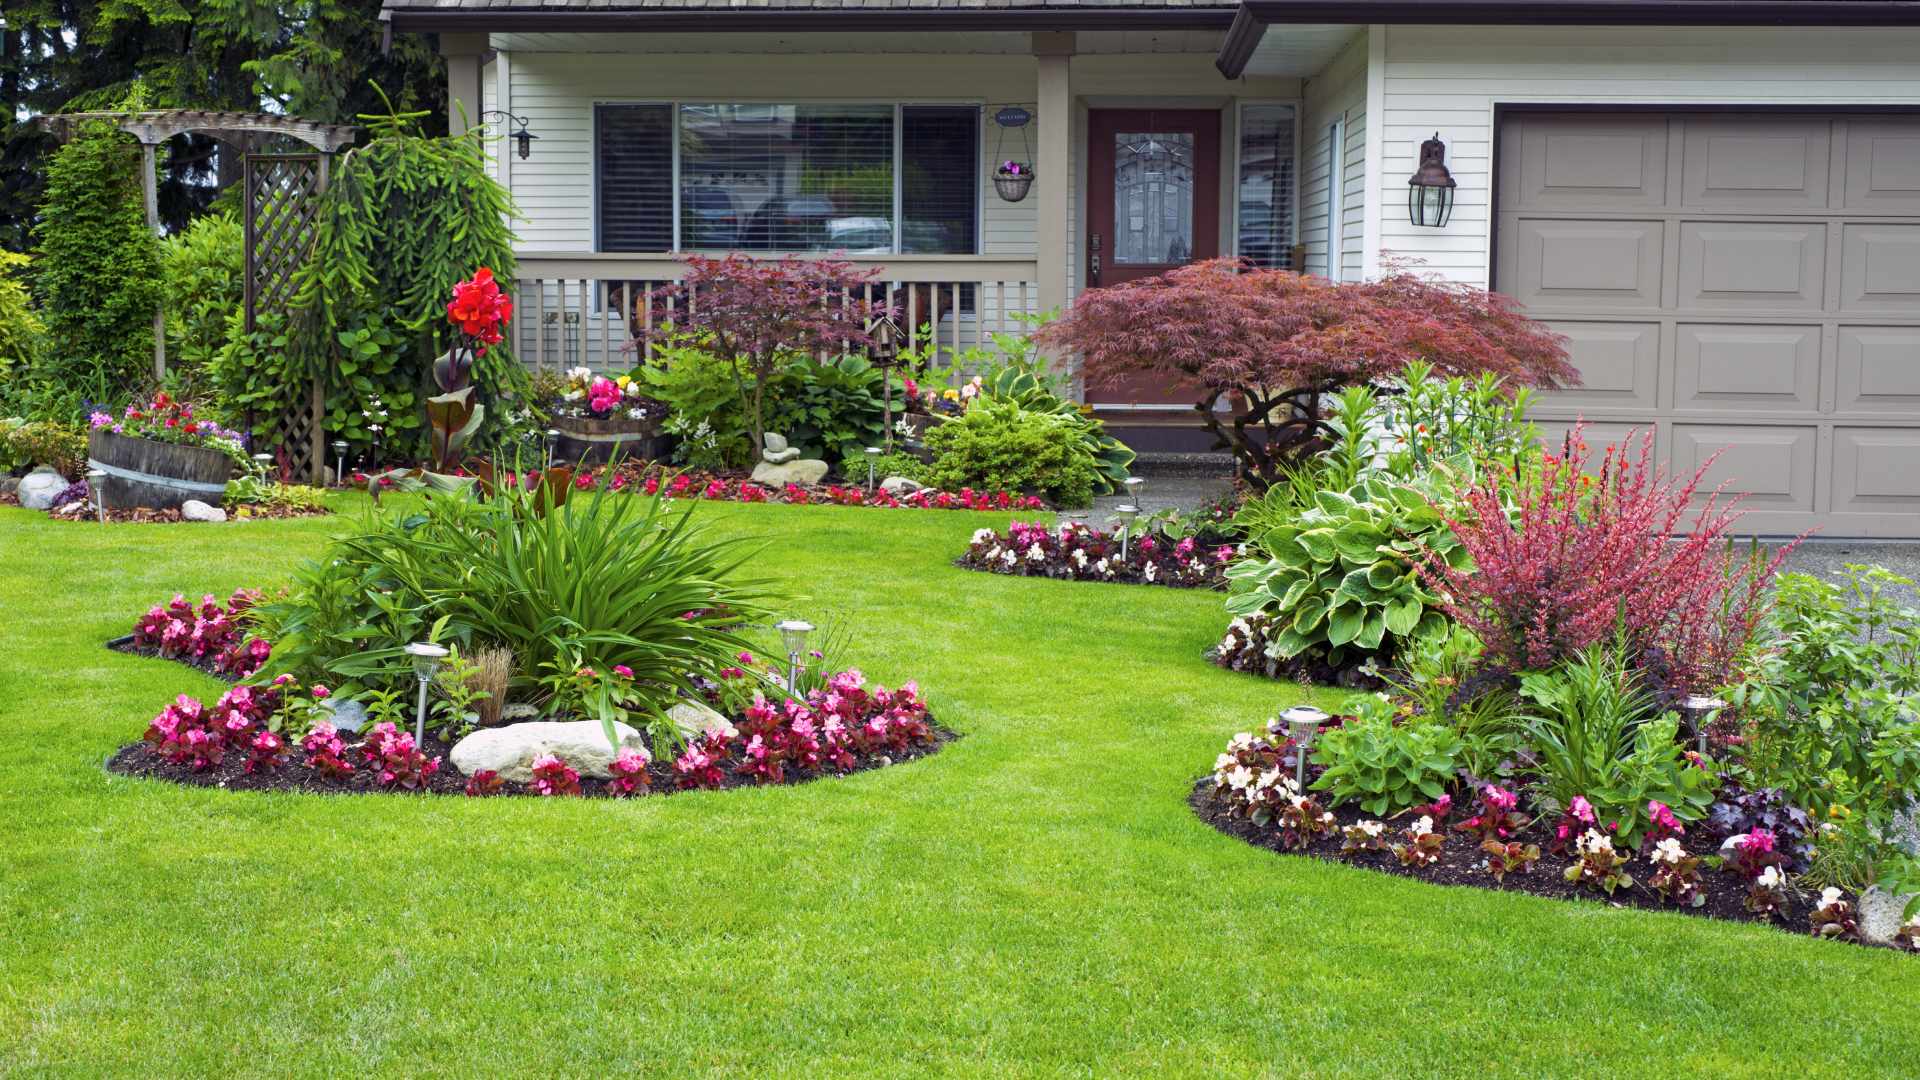 Easy Updates to Your Landscape Beds That Will Improve Your Curb Appeal